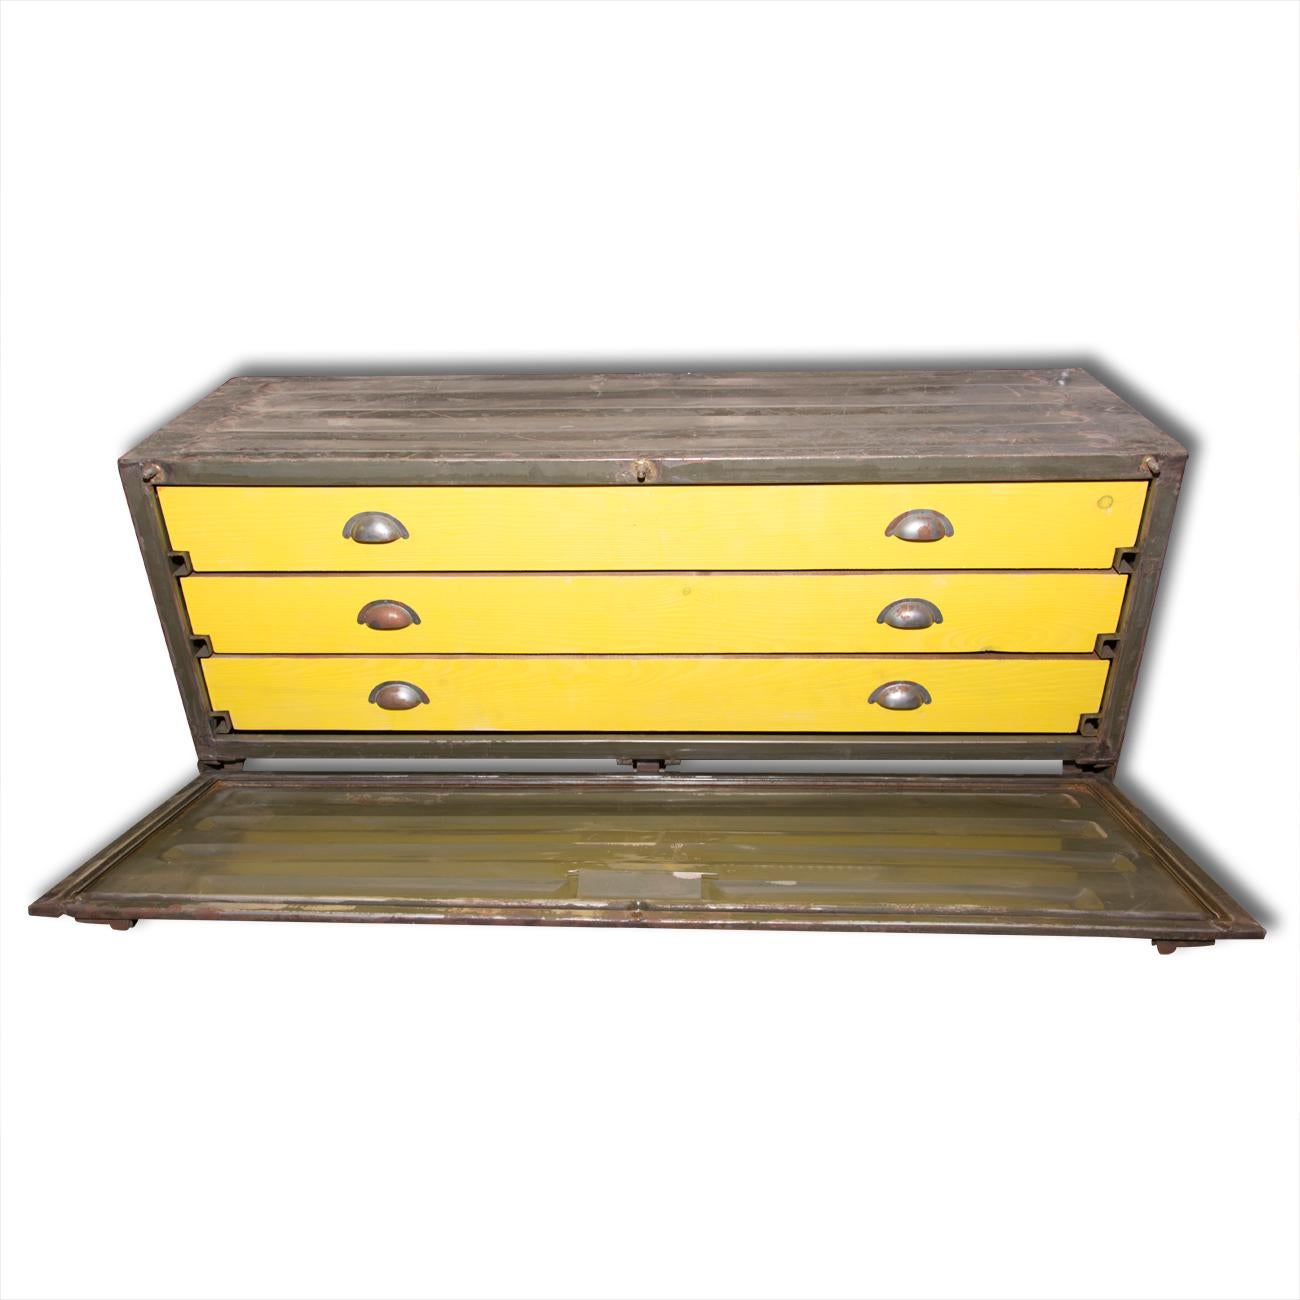 Czech Vintage Army Metal Box, Chest of Drawers, 1950s For Sale